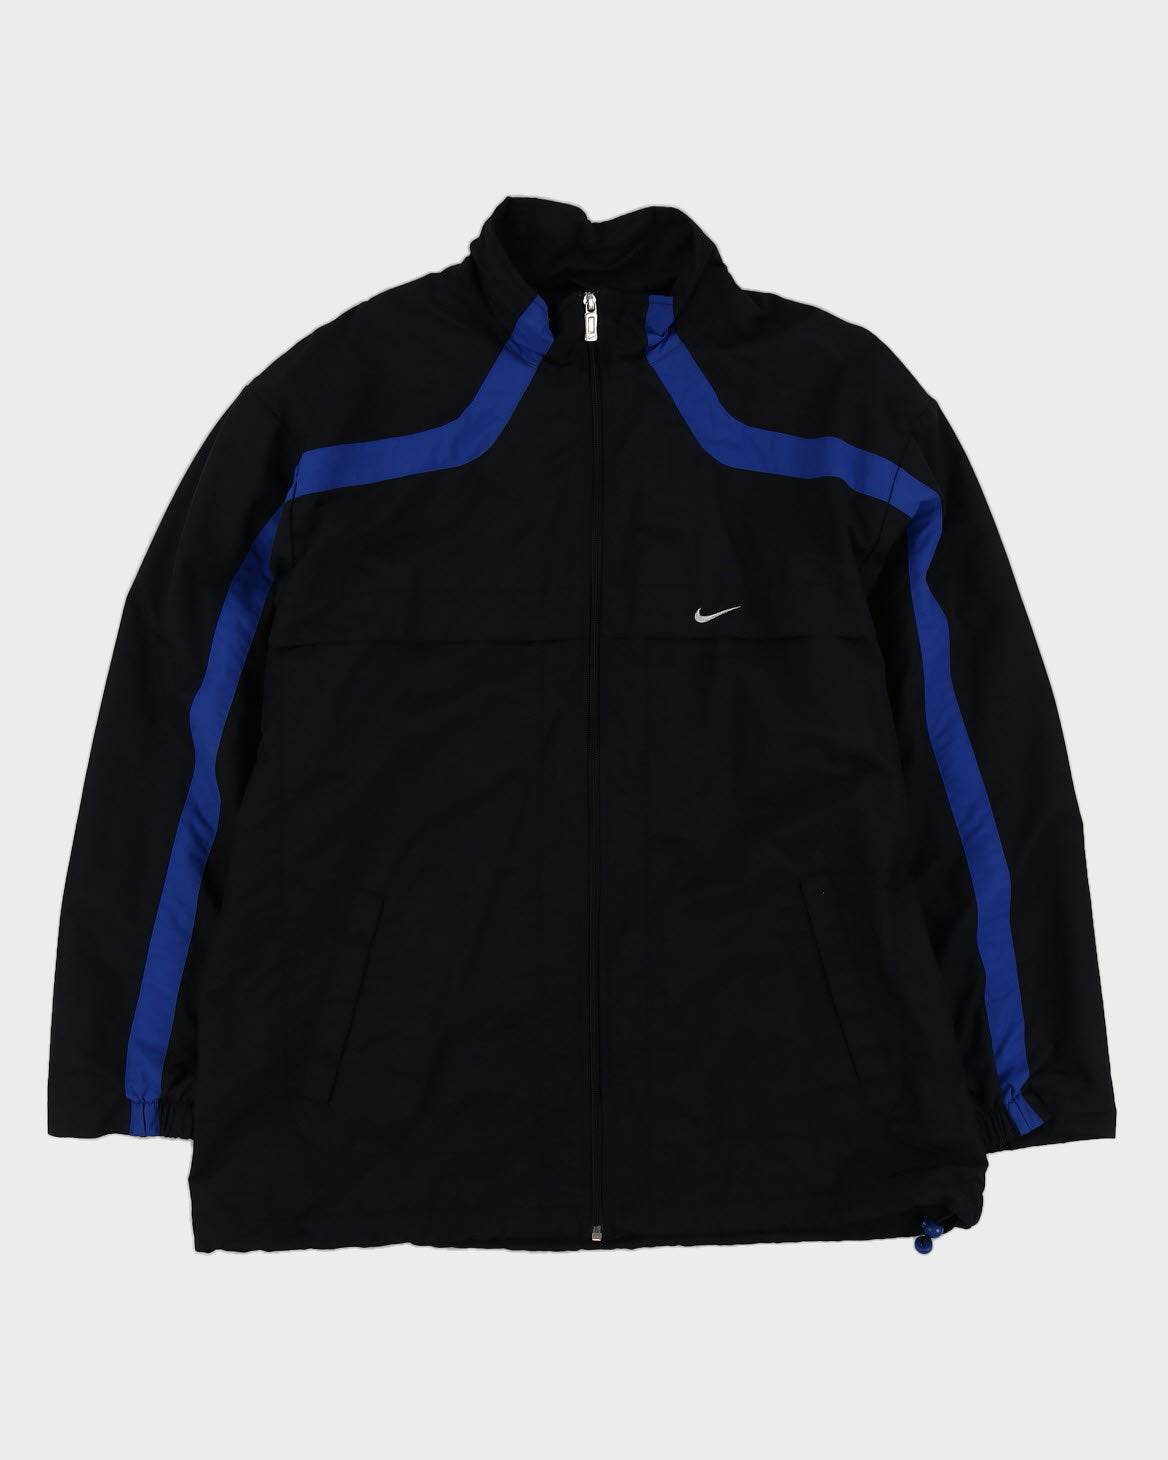 00s Y2K Nike Black Track Jacket With Embroidery On The Back - L